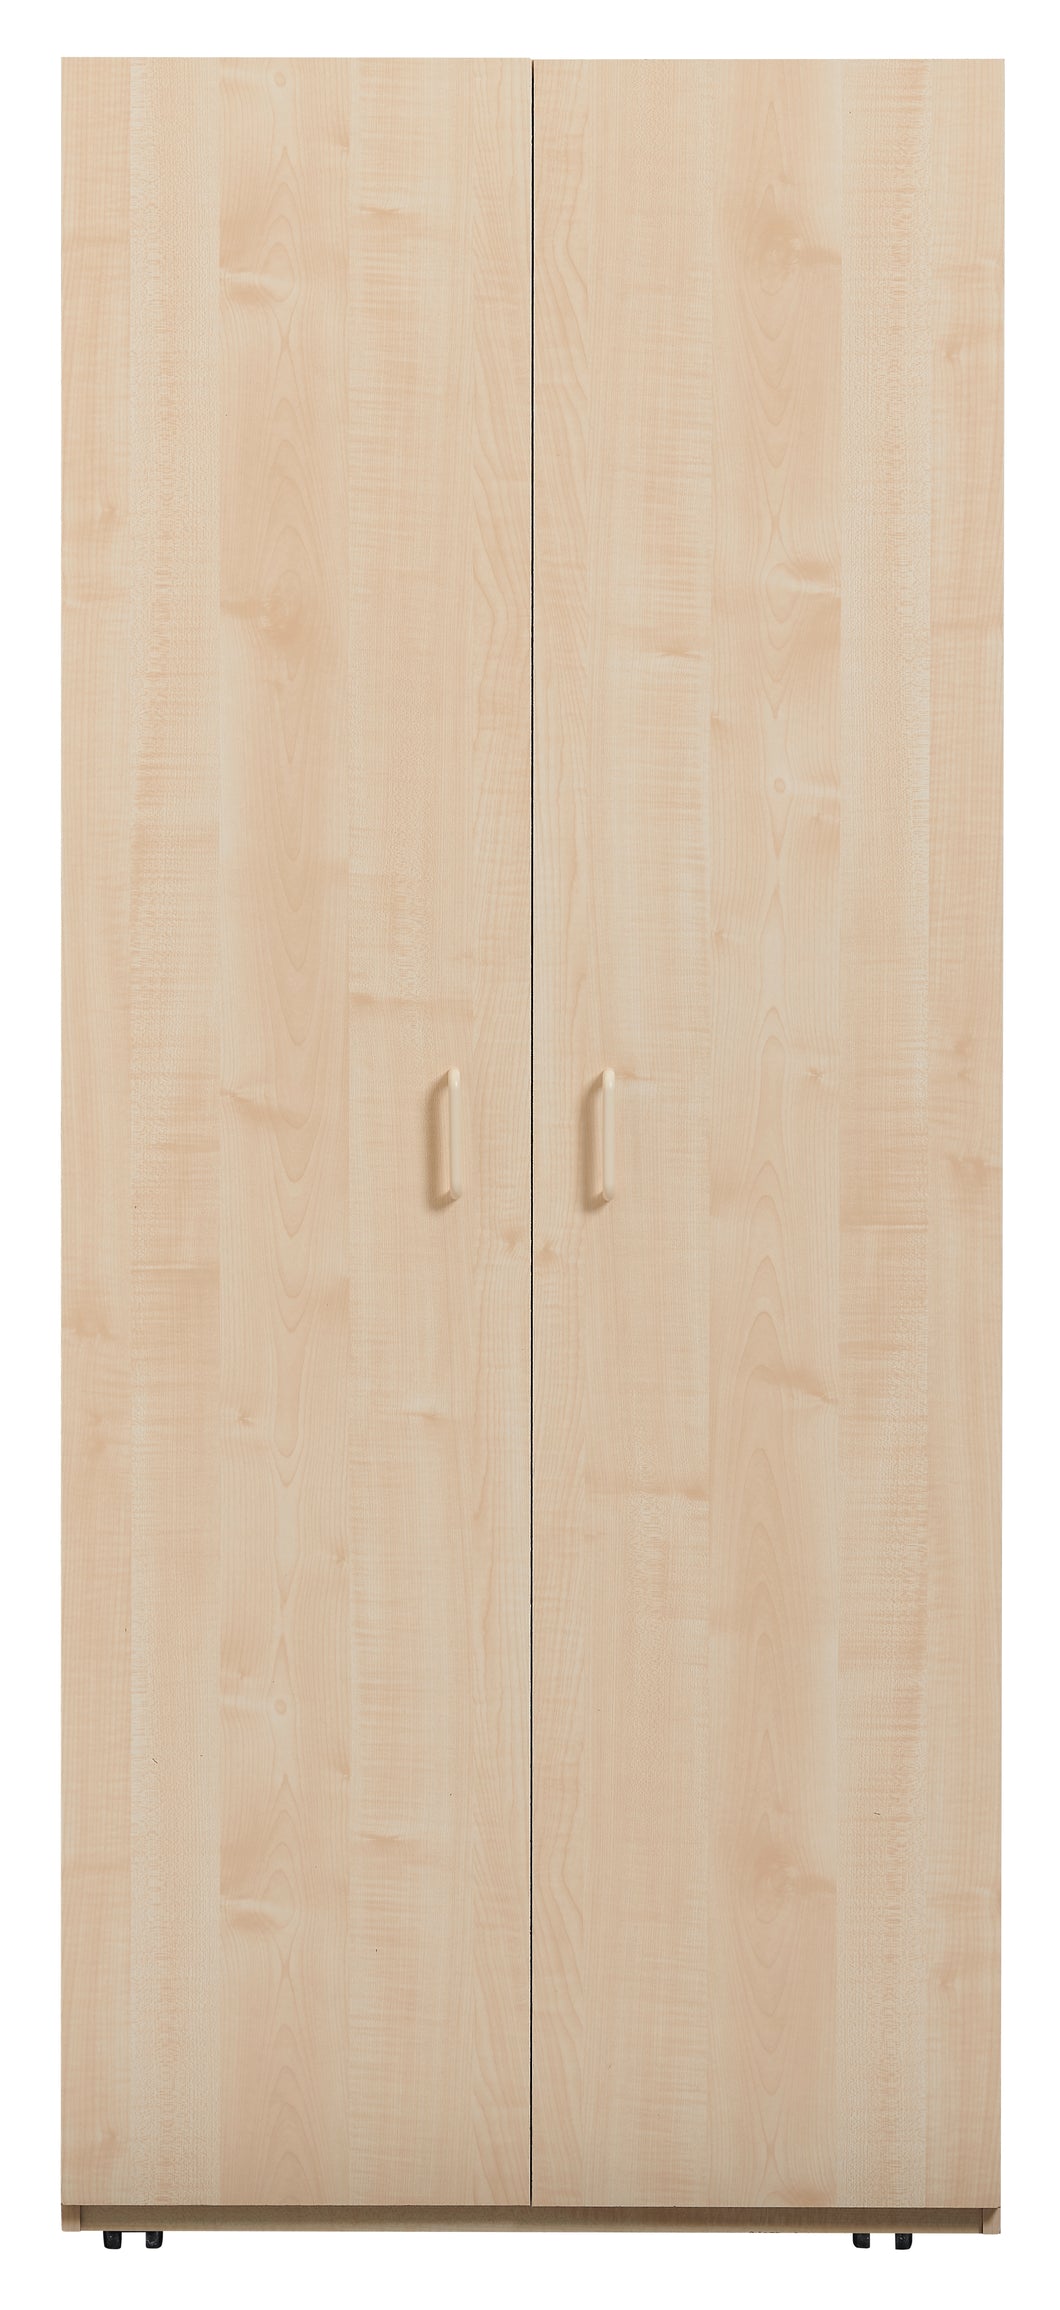 Calgary 2 Door Wardrobe (Without Mirror) - Property Letting Furniture